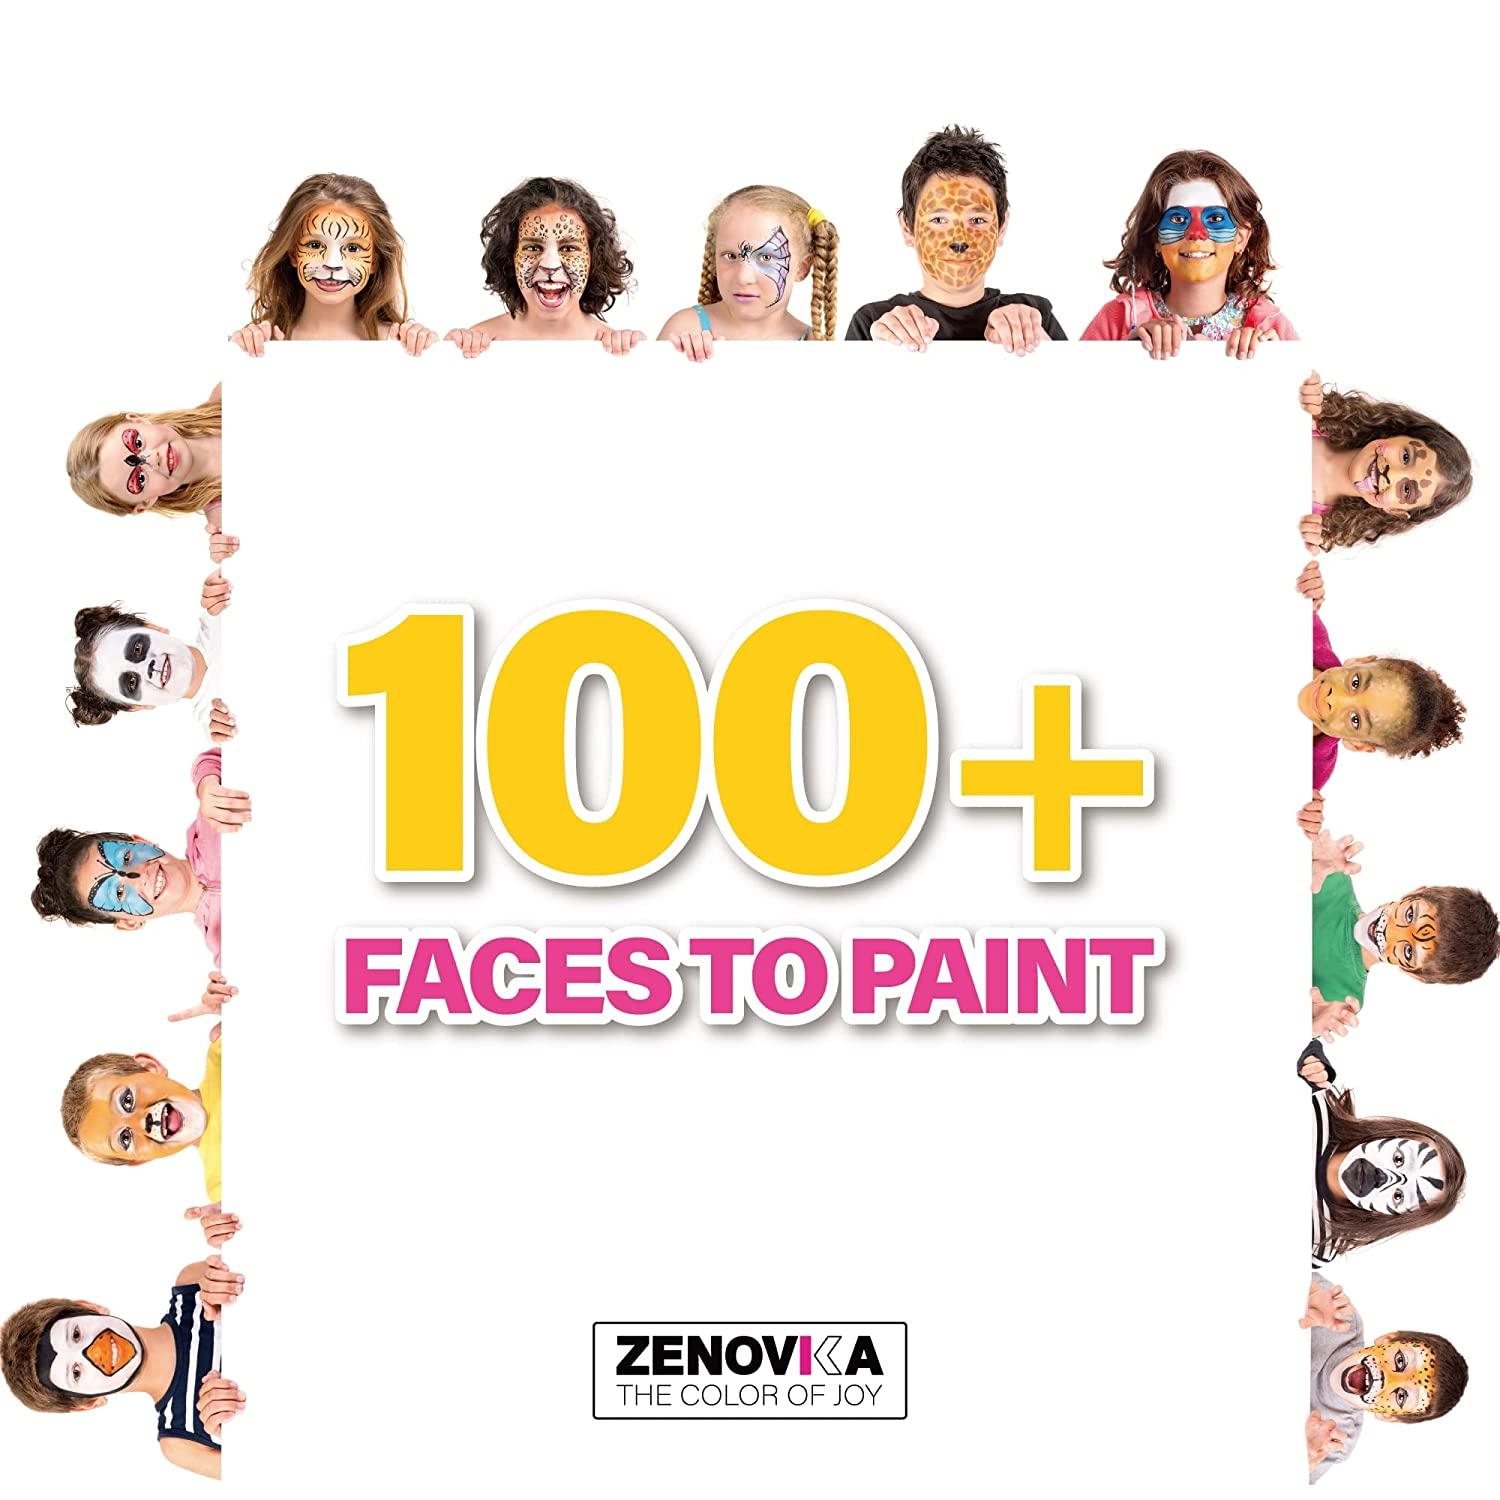 Face Paint Kit for Kids - 15 Colors Large Water Based Paints, 2 Brushes